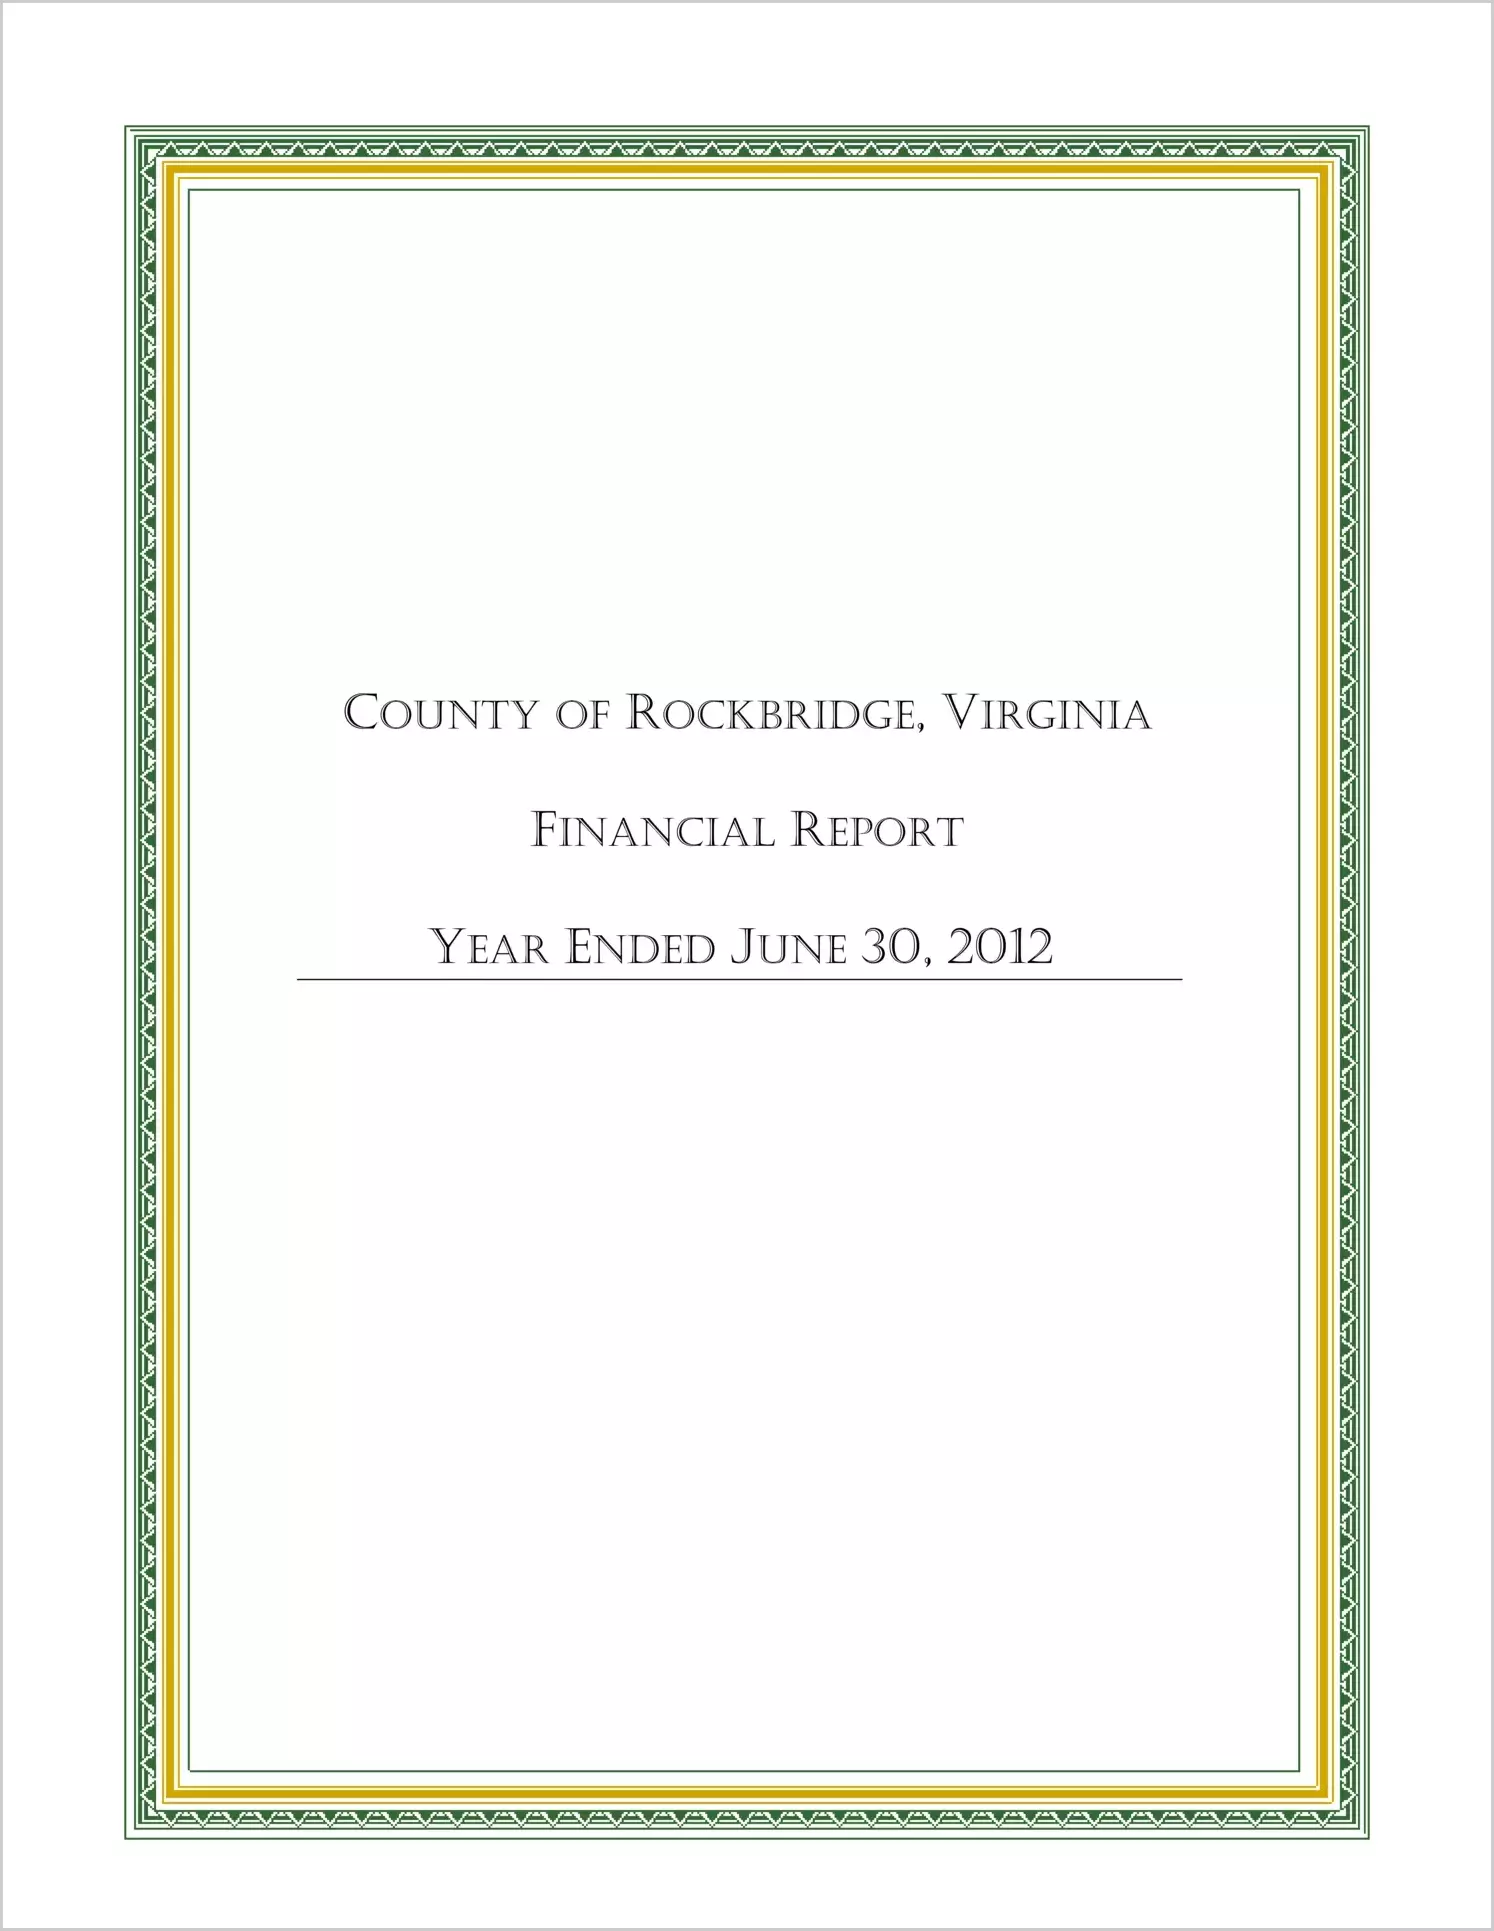 2012 Annual Financial Report for County of Rockbridge